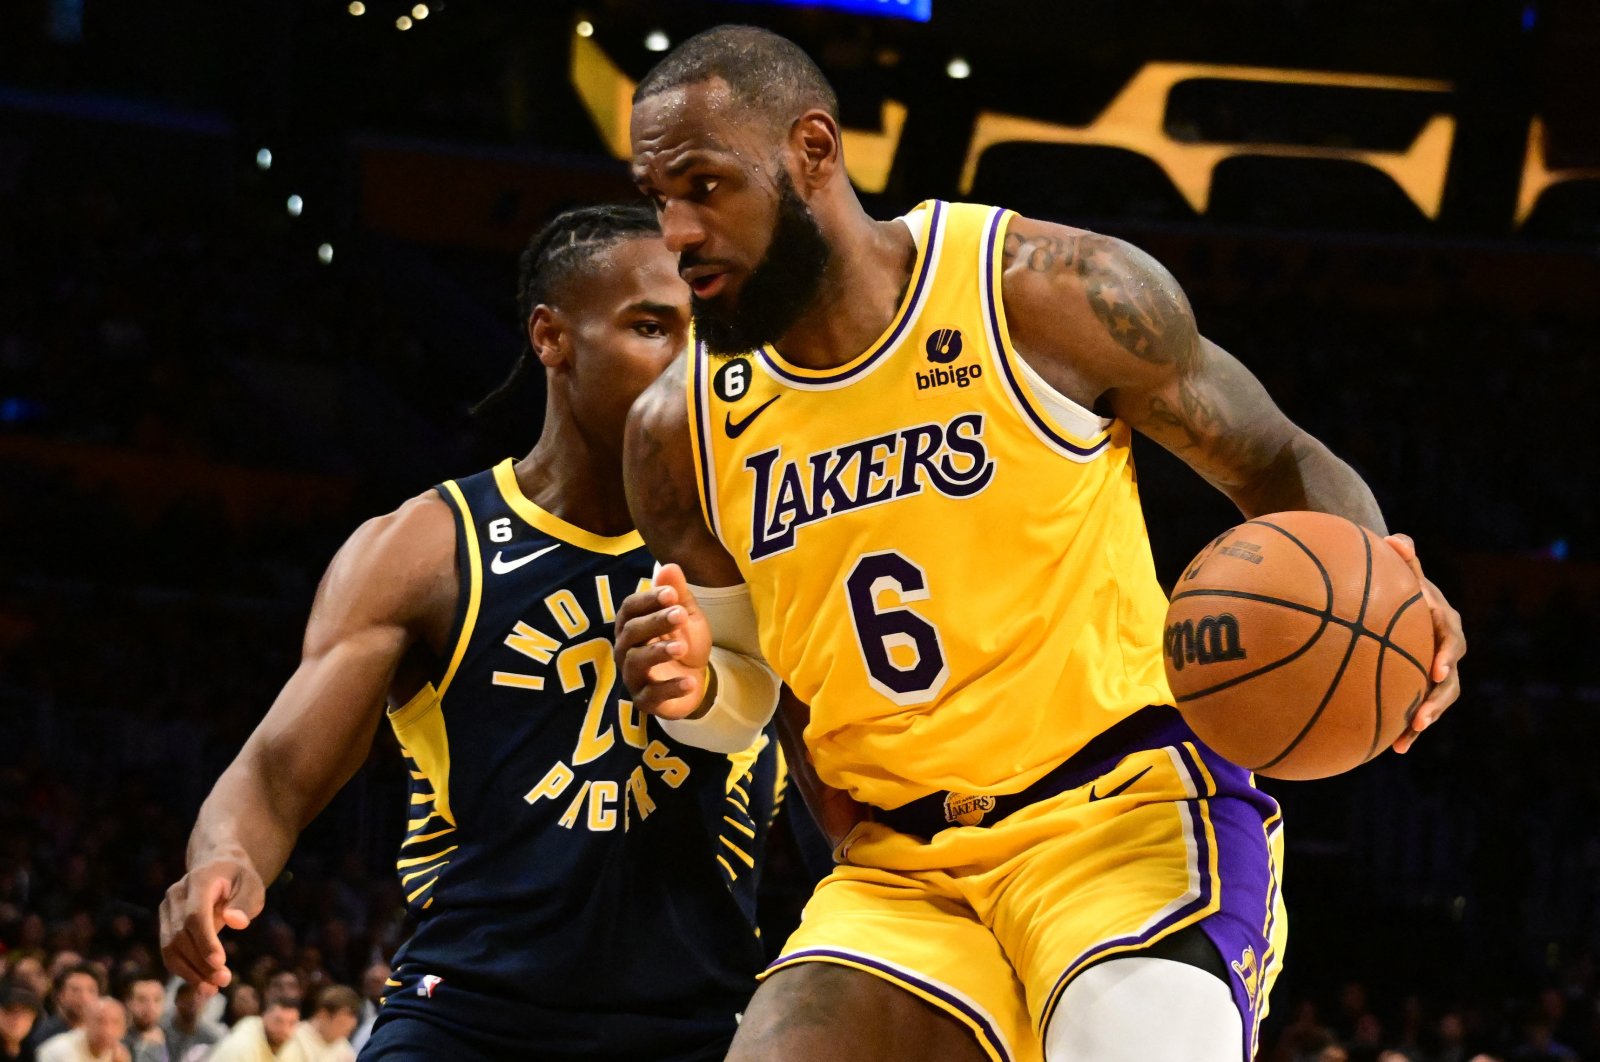 Indiana Pacers forward Aaron Nesmith (23) defends against Los Angeles Lakers forward LeBron James (6) in the second half at Crypto.com Arena, Nov. 28, 2022, Los Angeles, U.S. (Photo by Richard Mackson-USA TODAY Sports)